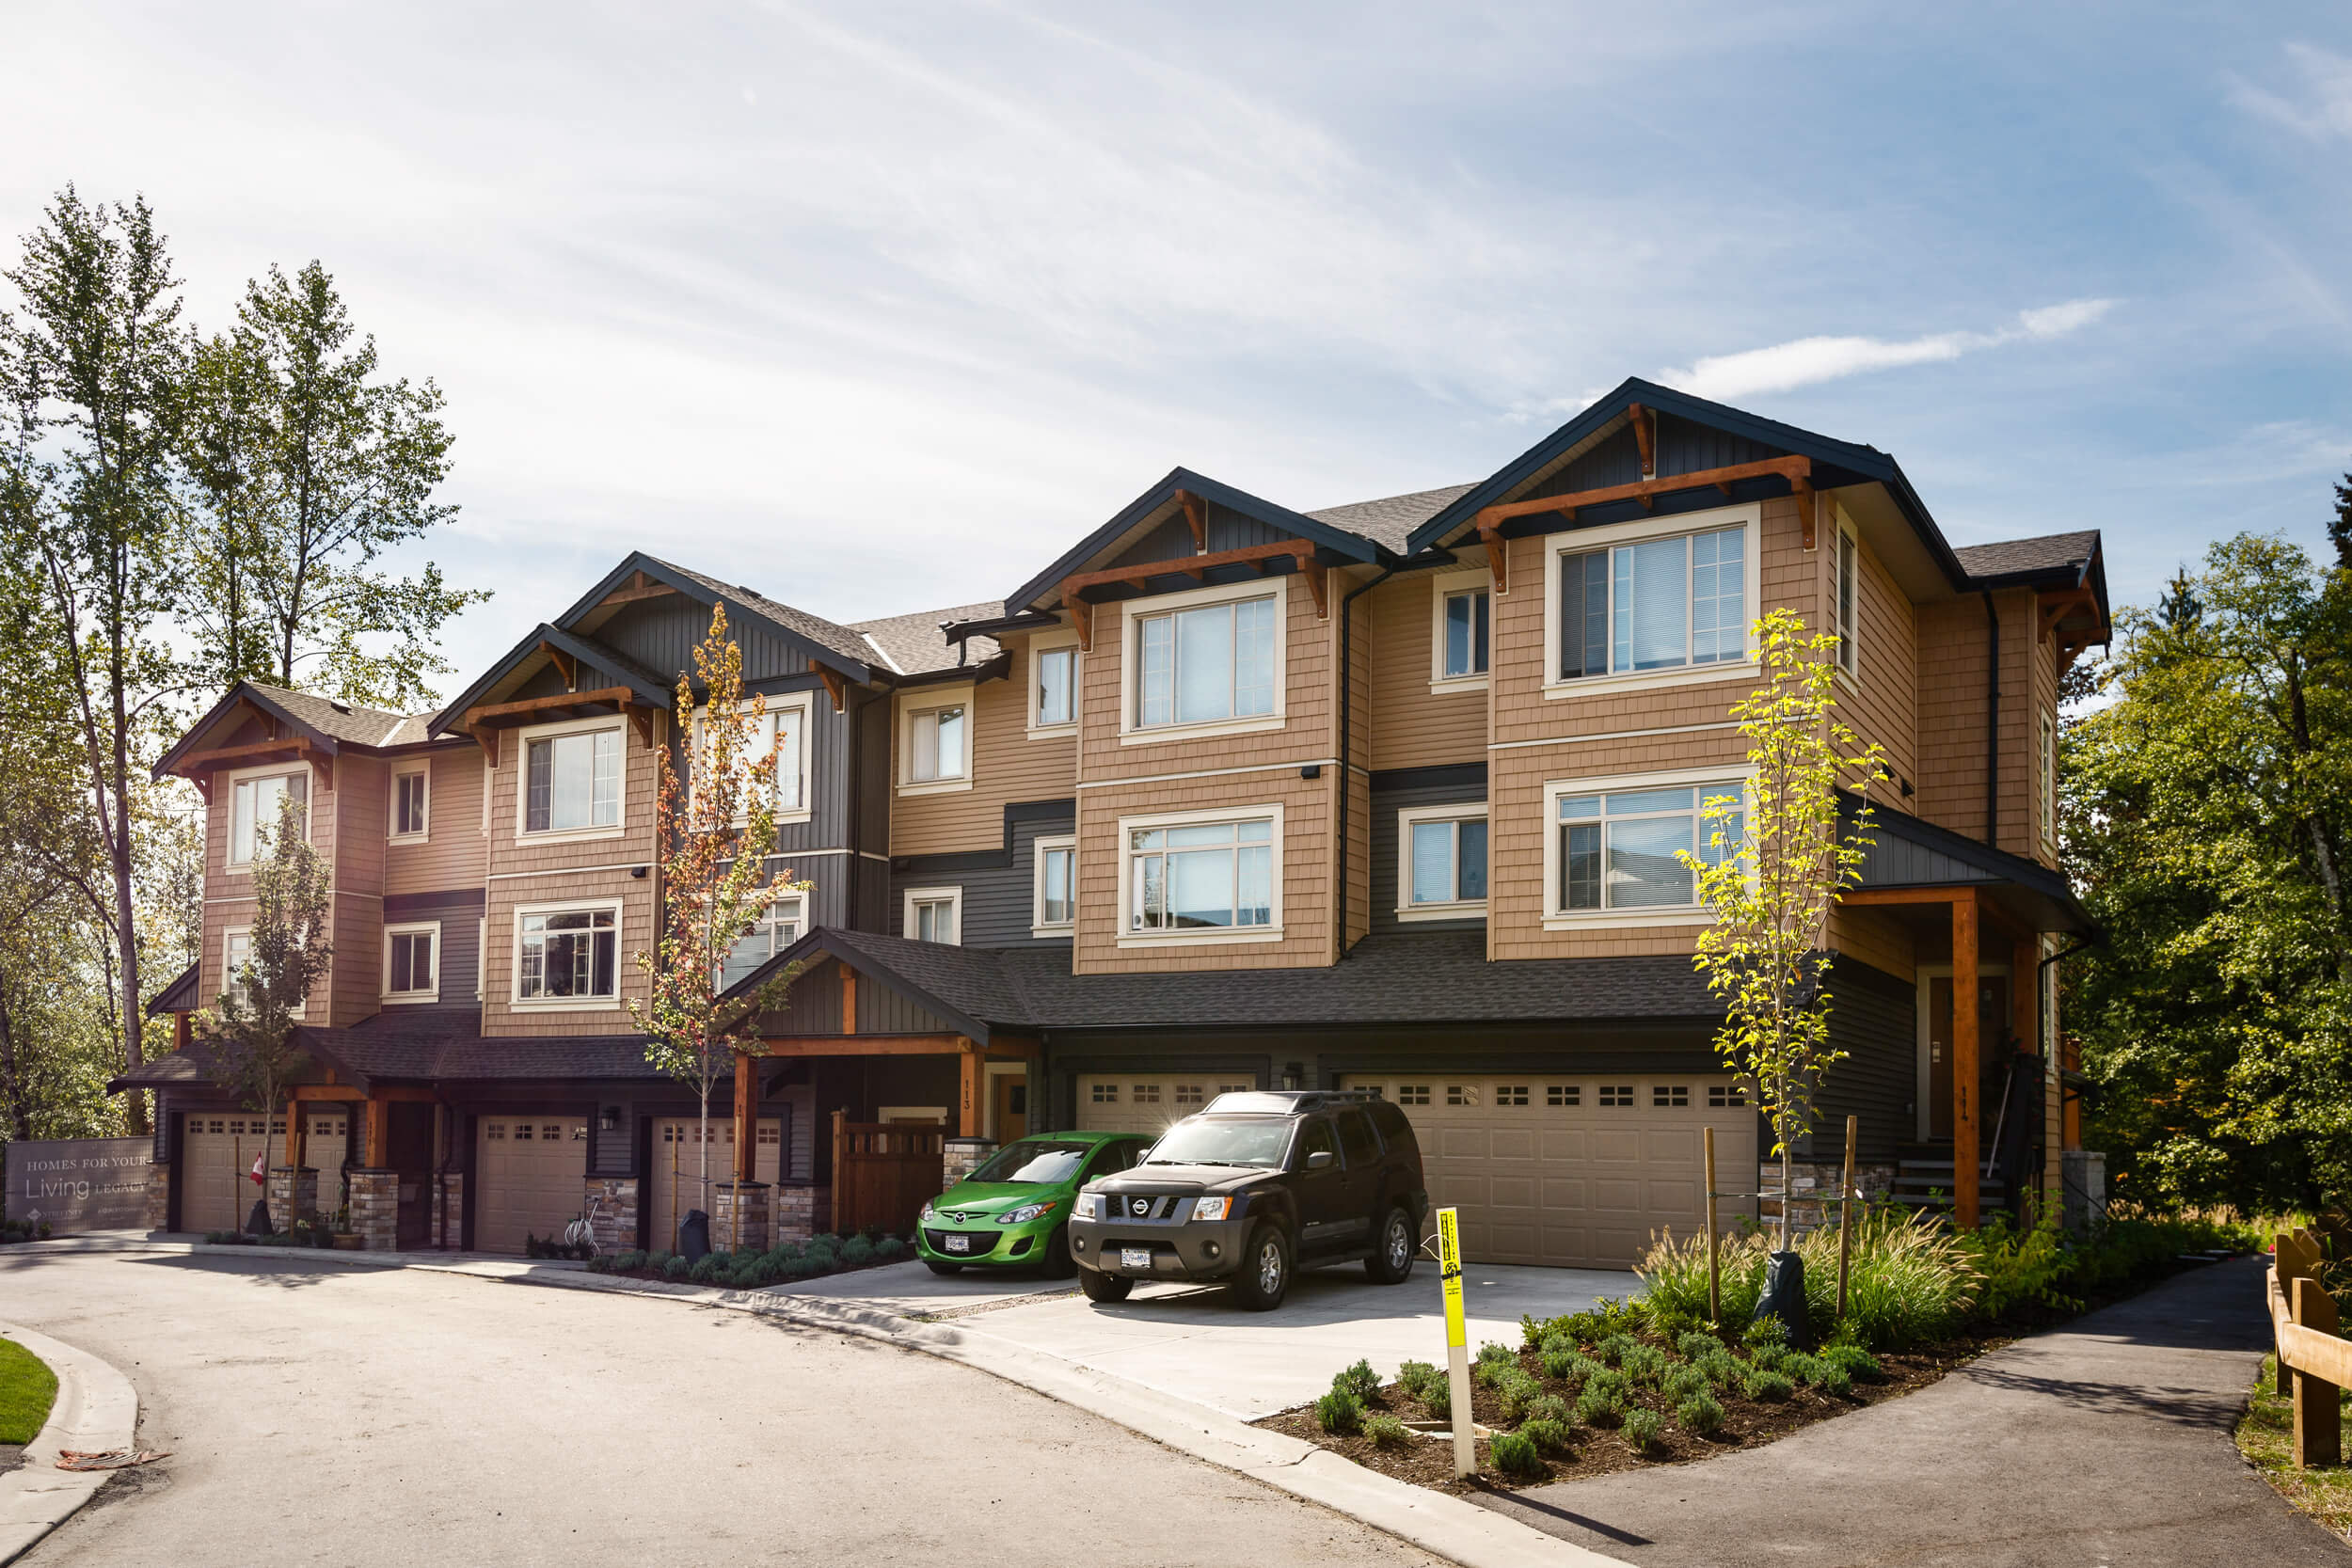 The “Maple Heights” development is a residential 167 unit townhouse project located at Maple Ridge. Design by Group 161 | Atelier Pacific Architecture.